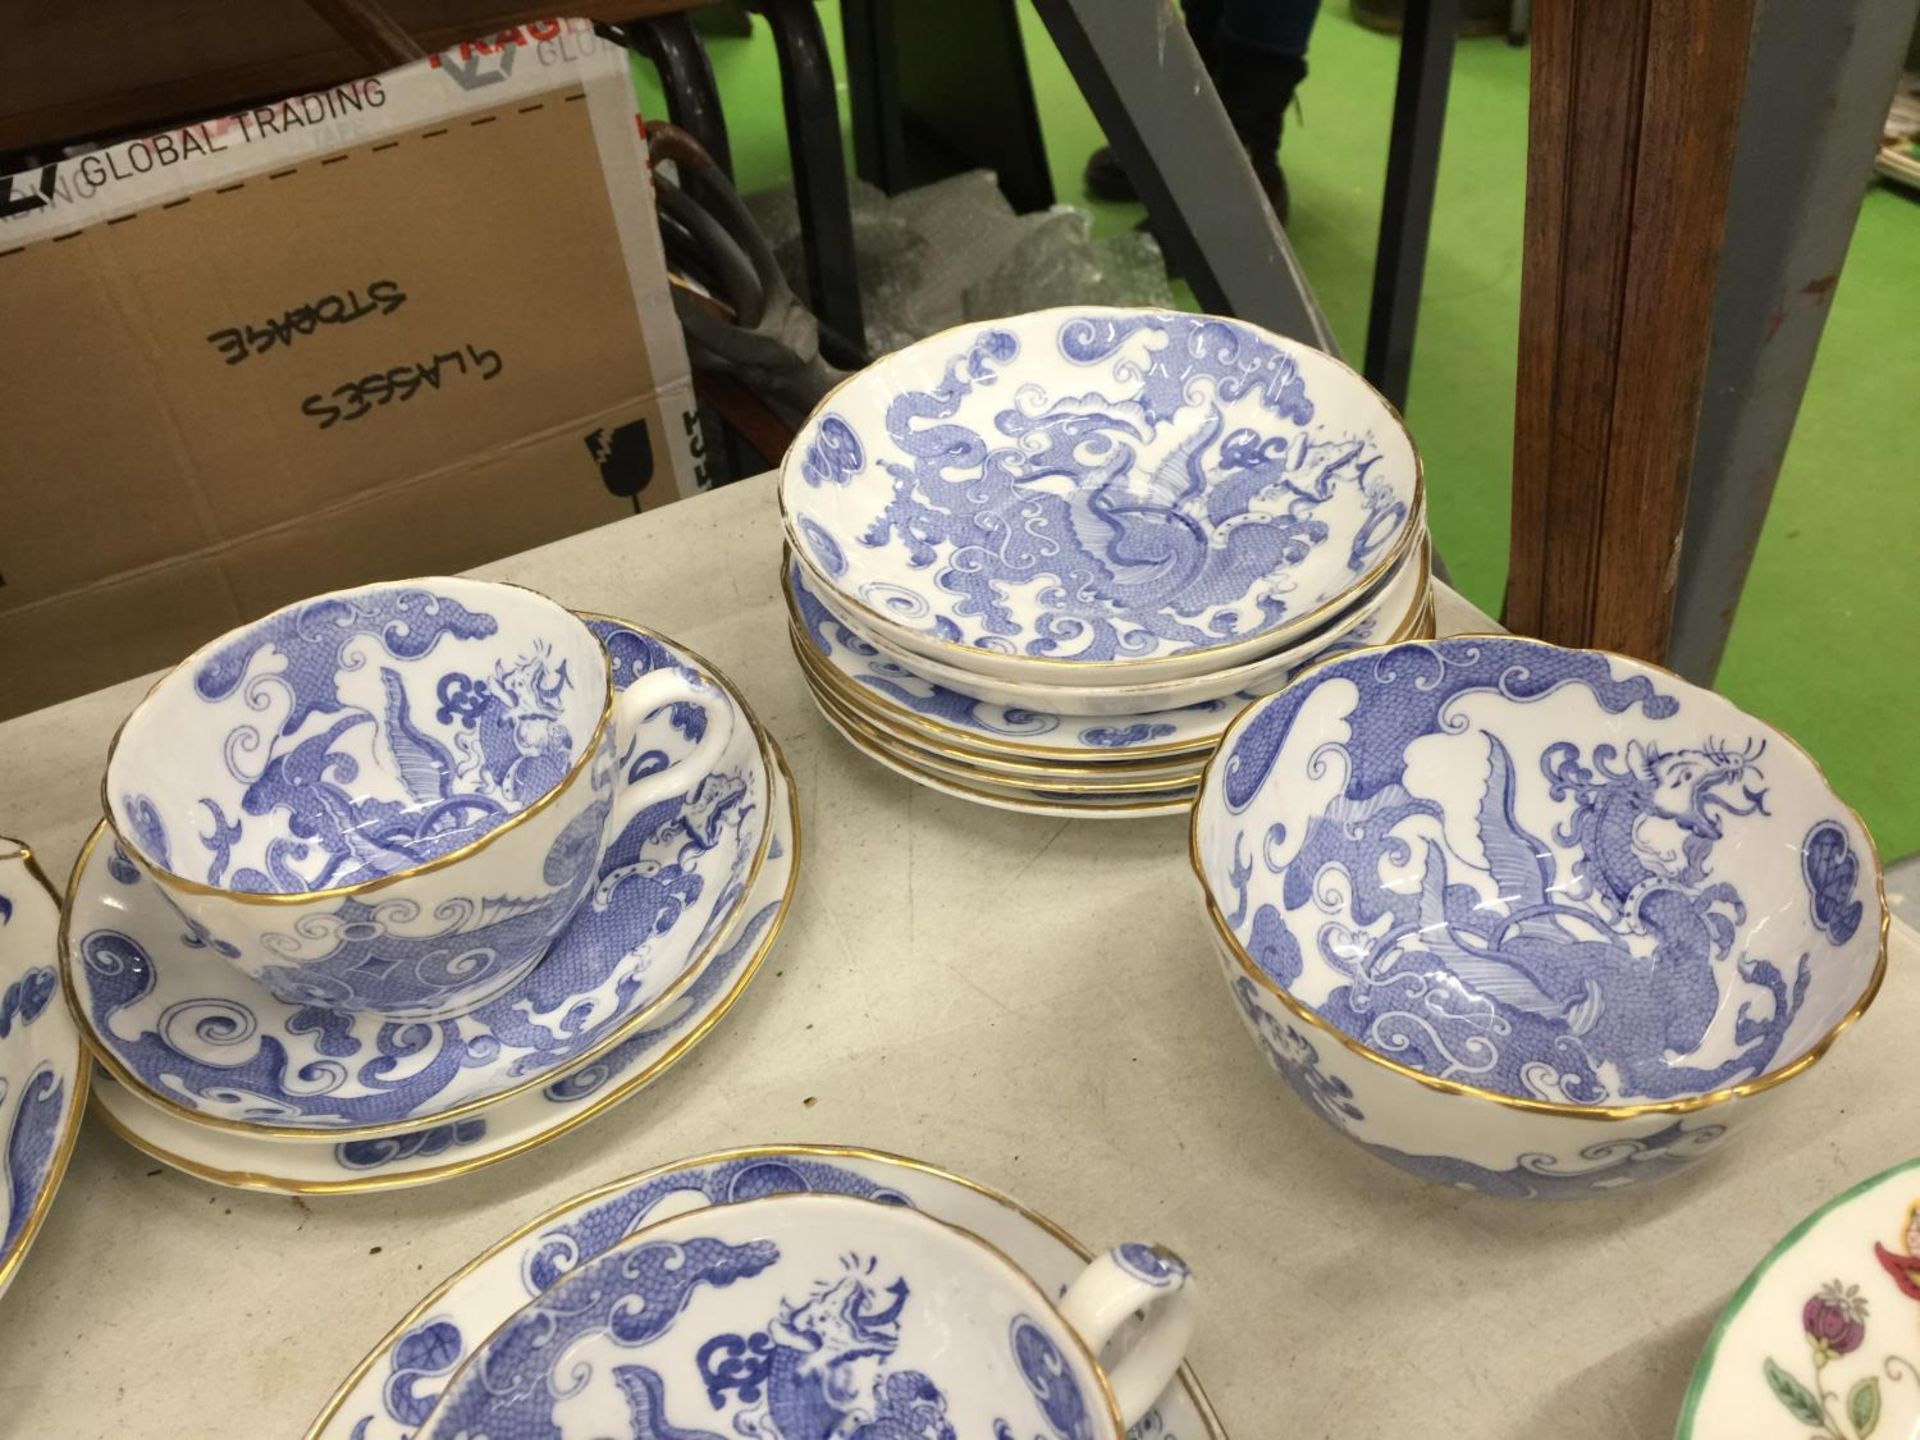 A QUANTITY OF ROYAL WORCESTER BLUE PATTERN TEACUPS, SAUCERS, PLATES, ETC, AYNSLEY 'HENLEY' PLATES - Image 4 of 6